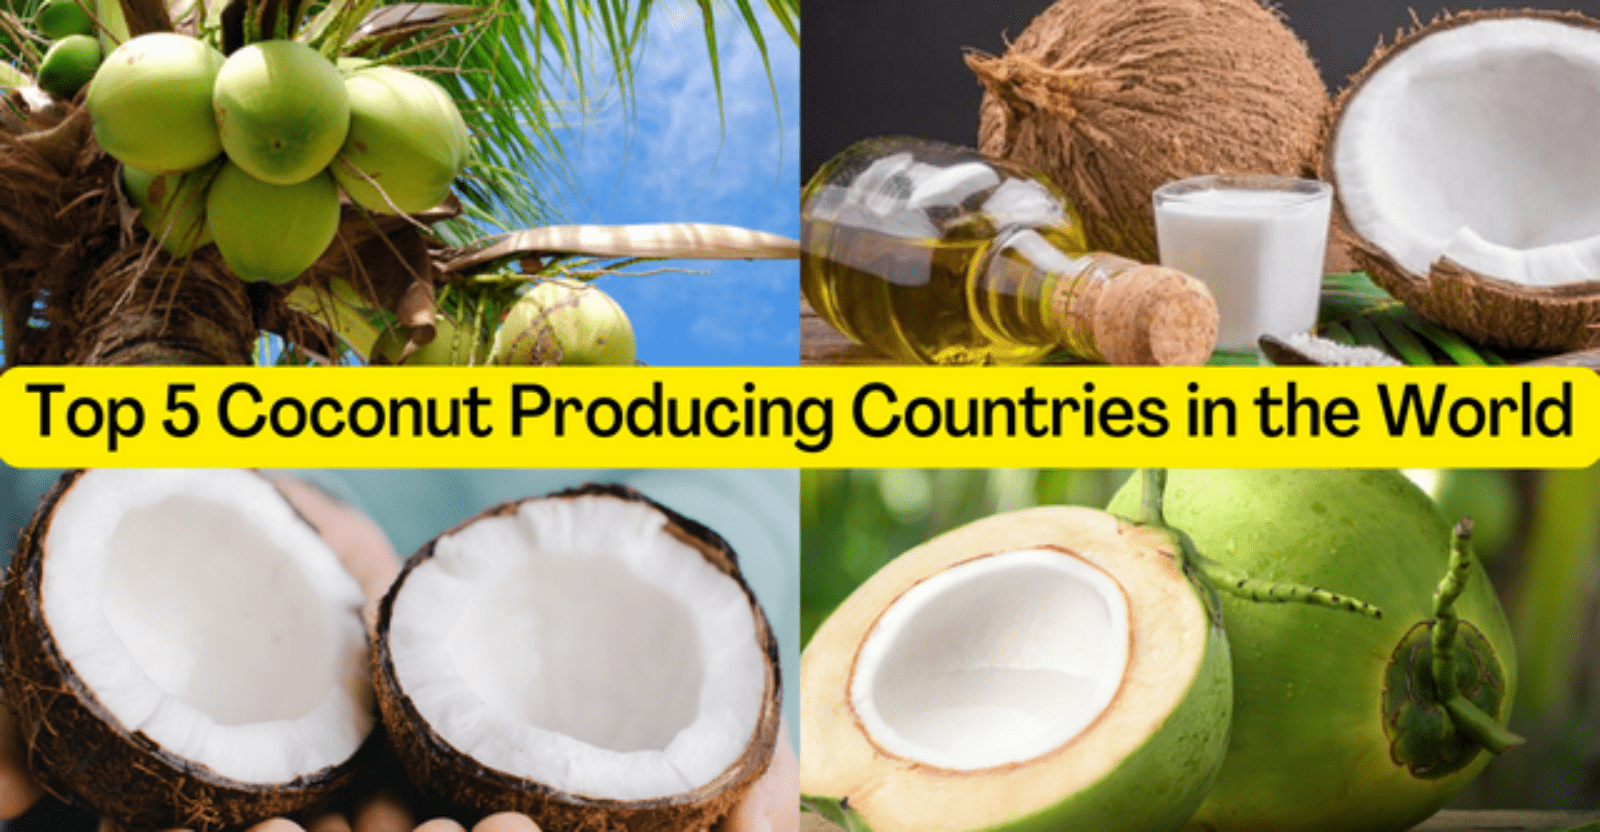 A Look Into the Top 5 Coconut Producing Countries in the World – The Shahab